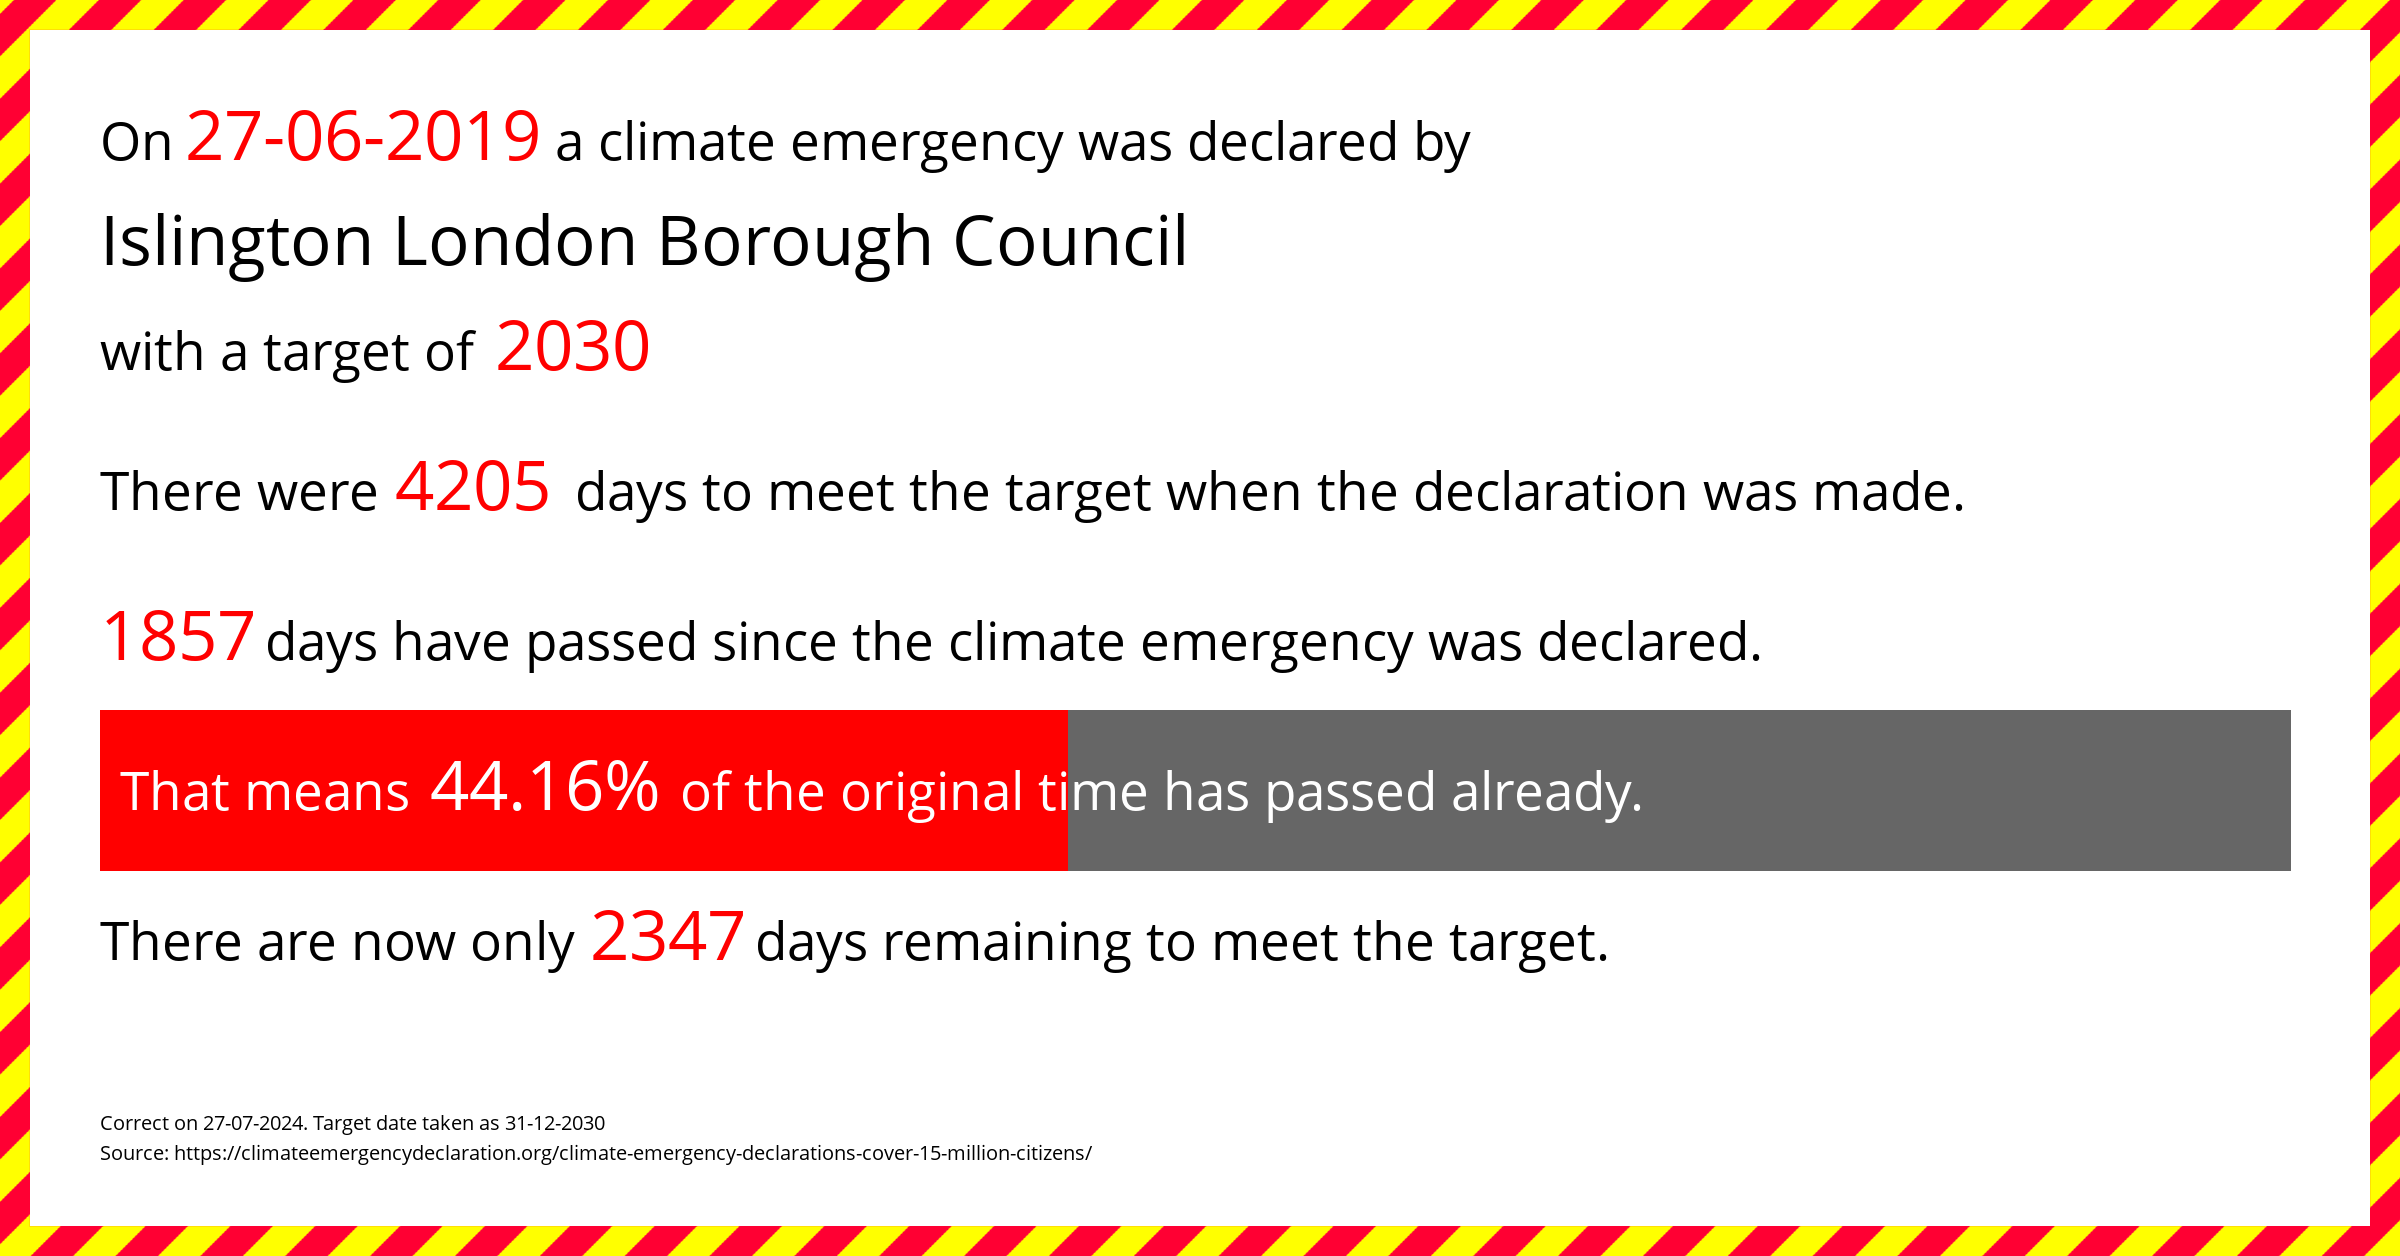 Islington London Borough Council declared a Climate emergency on Thursday 27th June 2019, with a target of 2030.